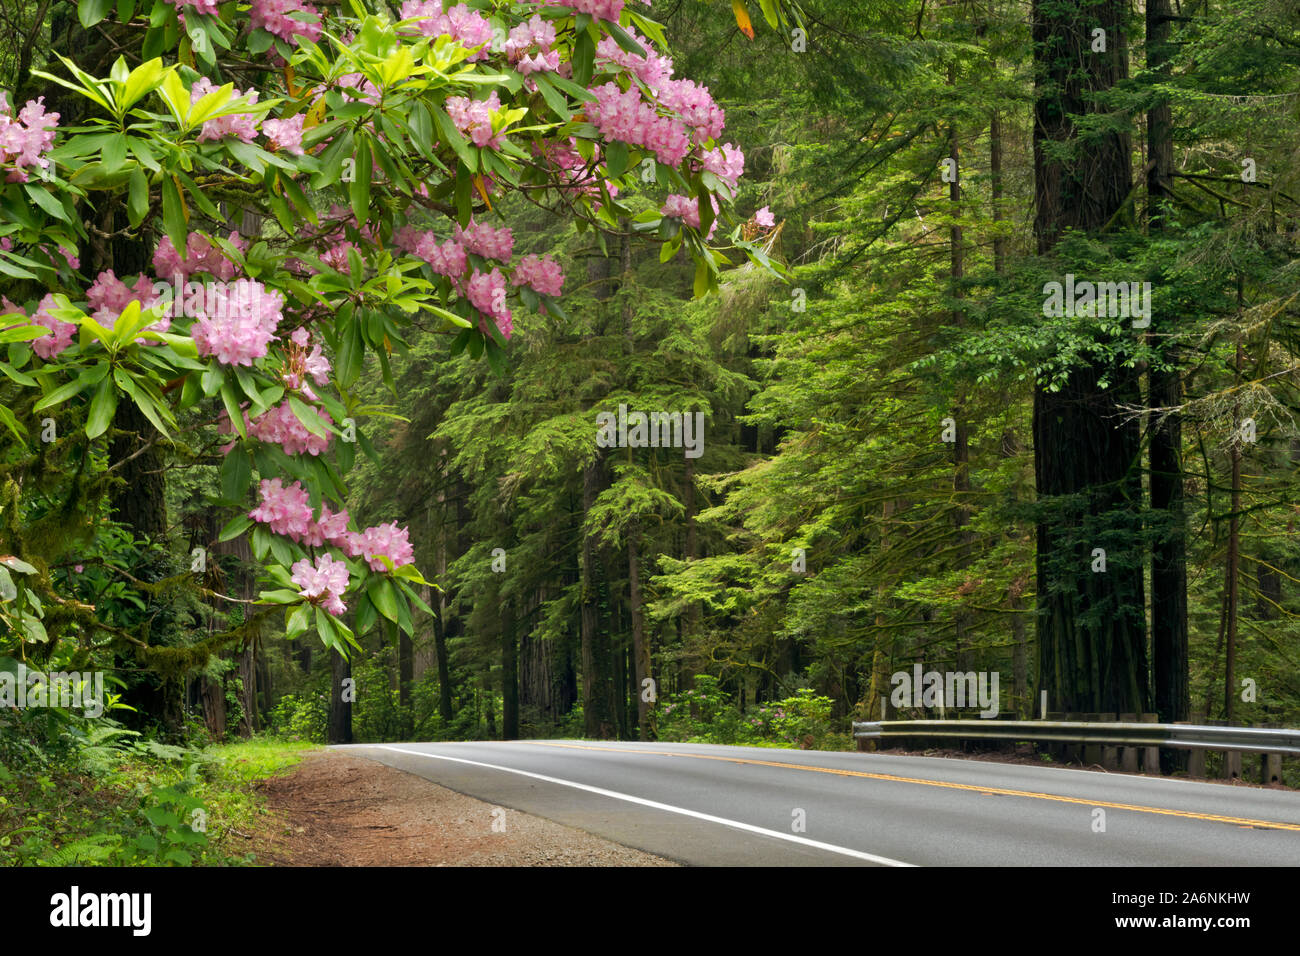 CA03811-00...CALIFORNIA - Native rhododendron in full bloom along Highway 199 in Jedediah Smith Redwoods State Park; part of the Redwoods National and Stock Photo